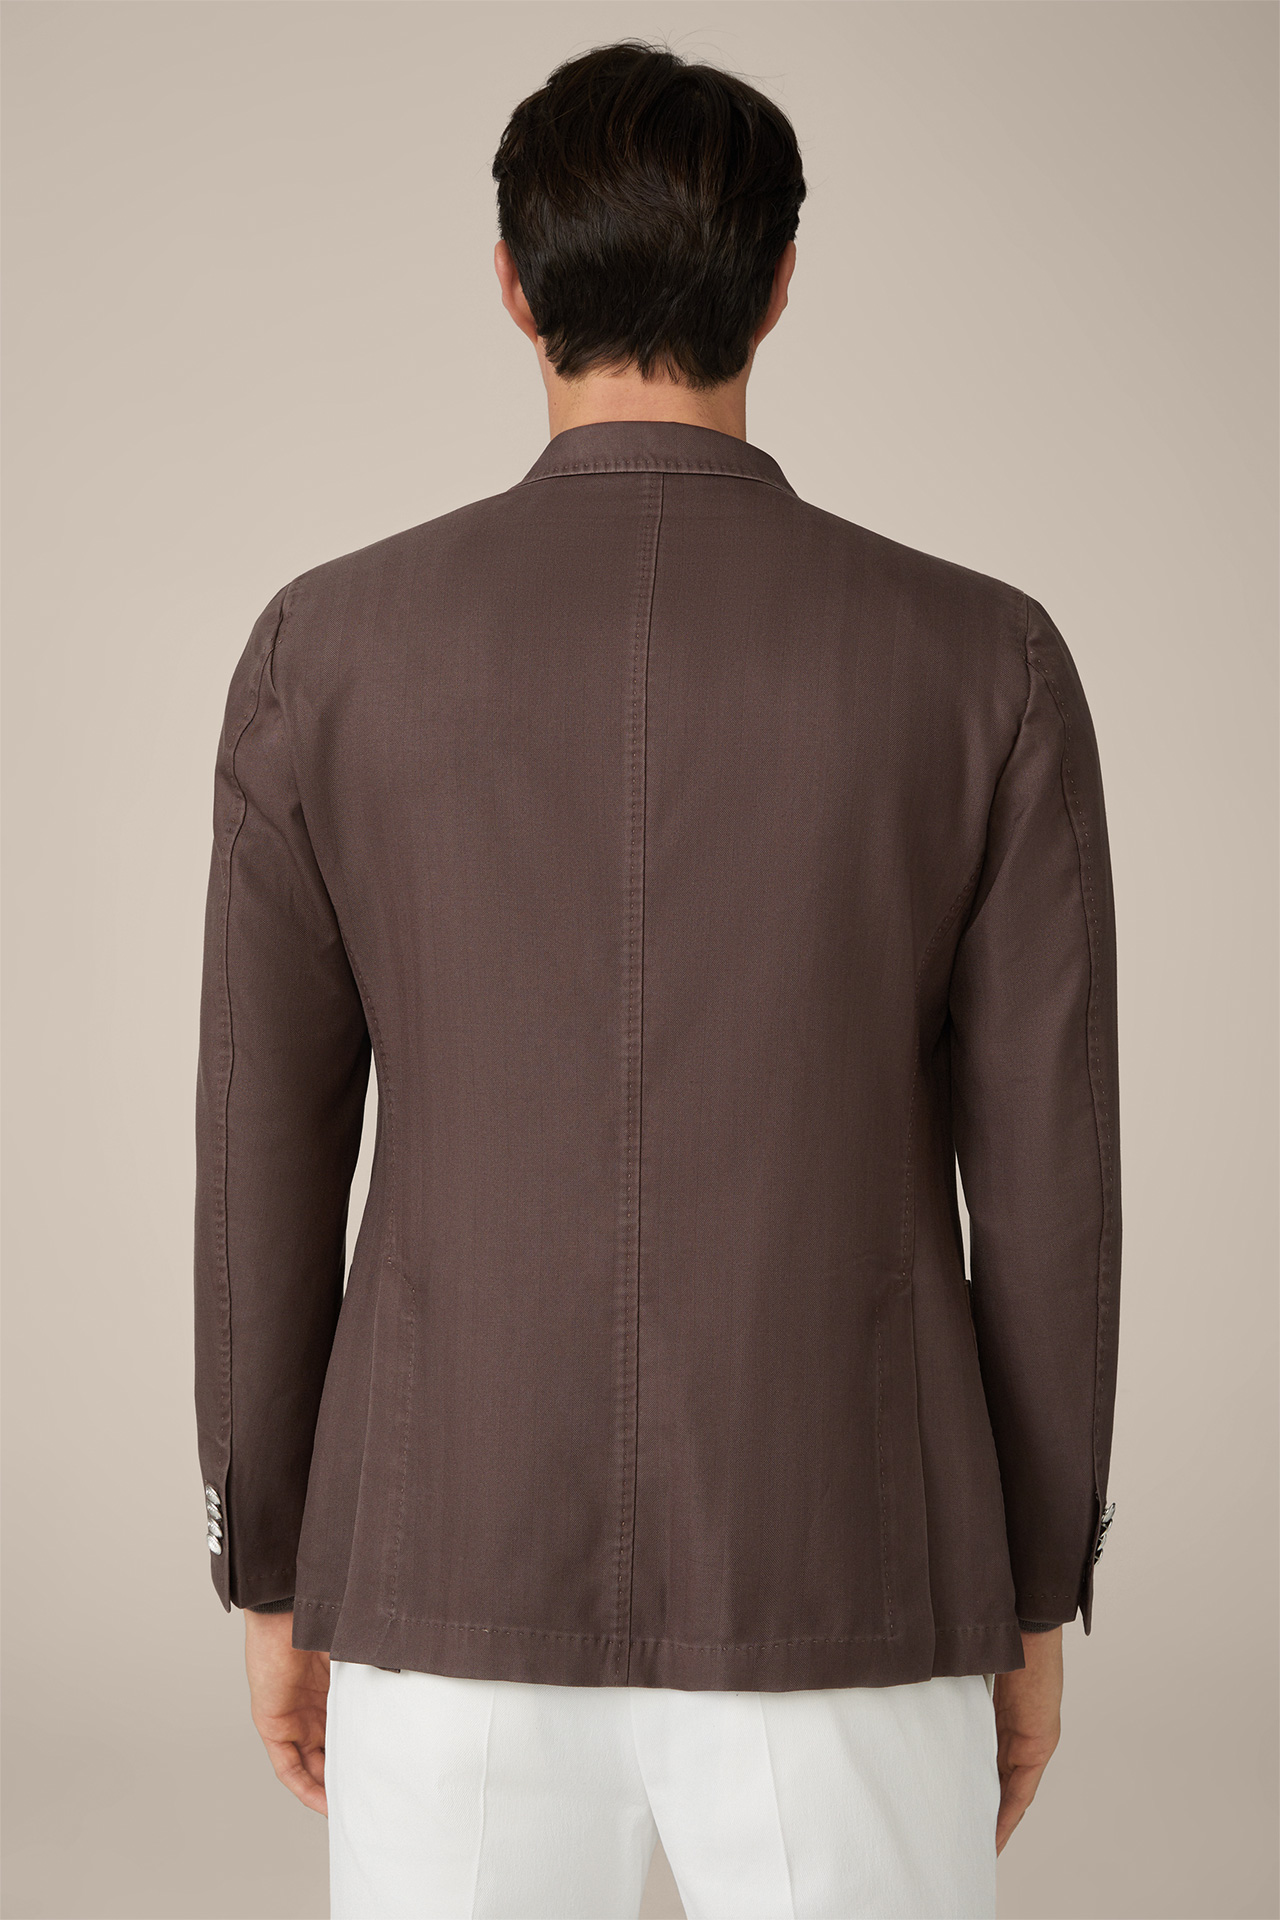 Secco Virgin Wool Double-Breasted Jacket in Brown